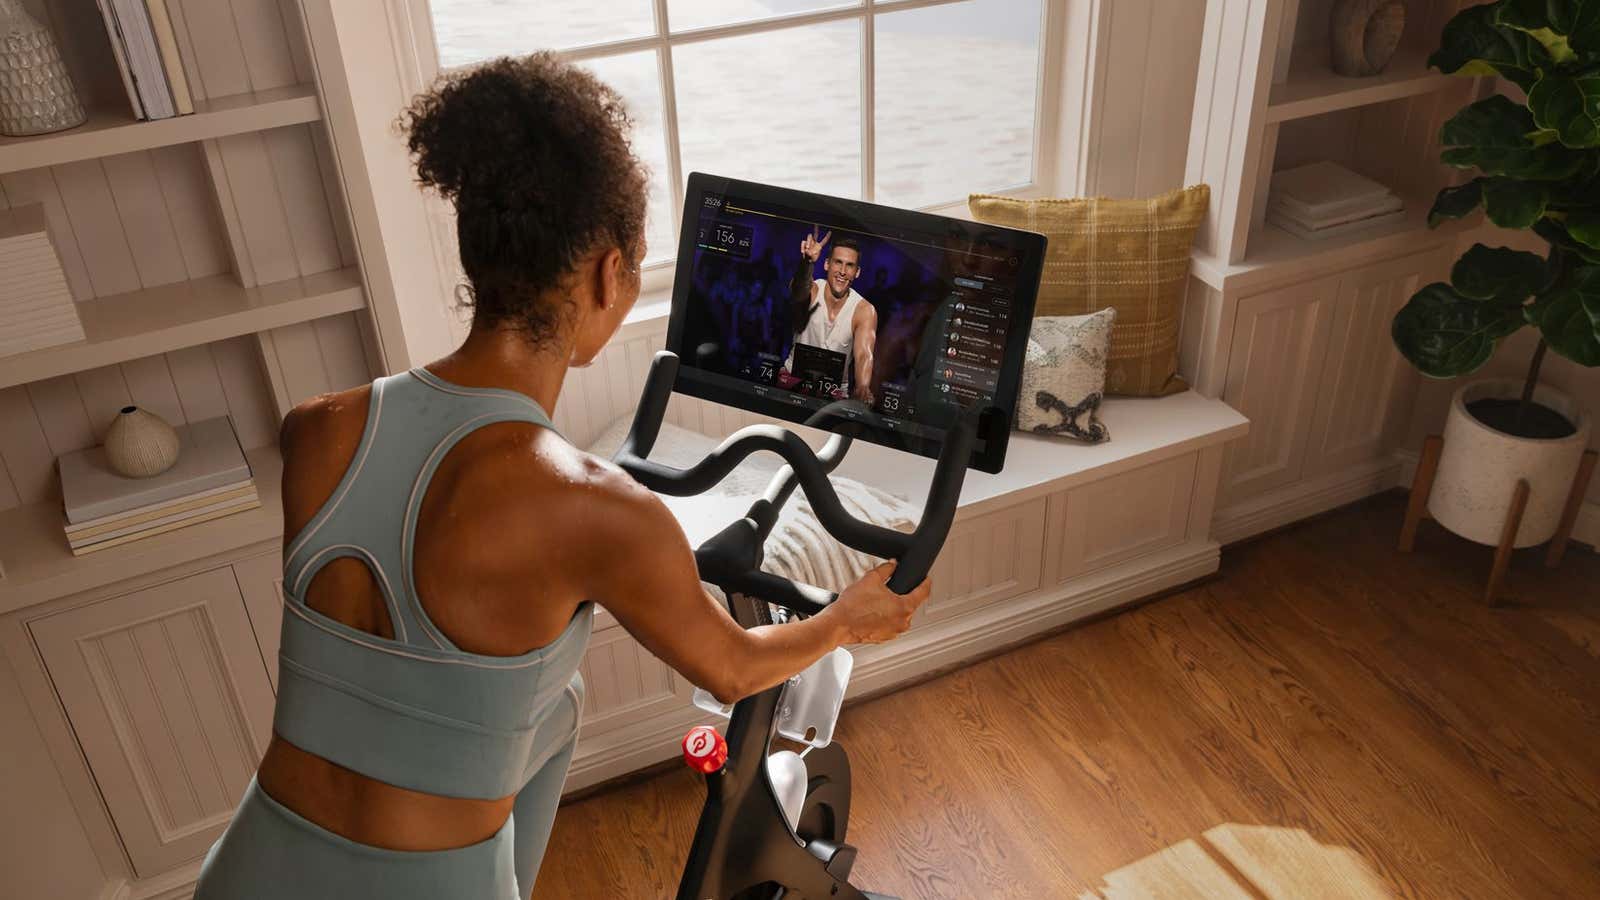 As Covid-19 forces fitness indoors, Peloton is thriving.